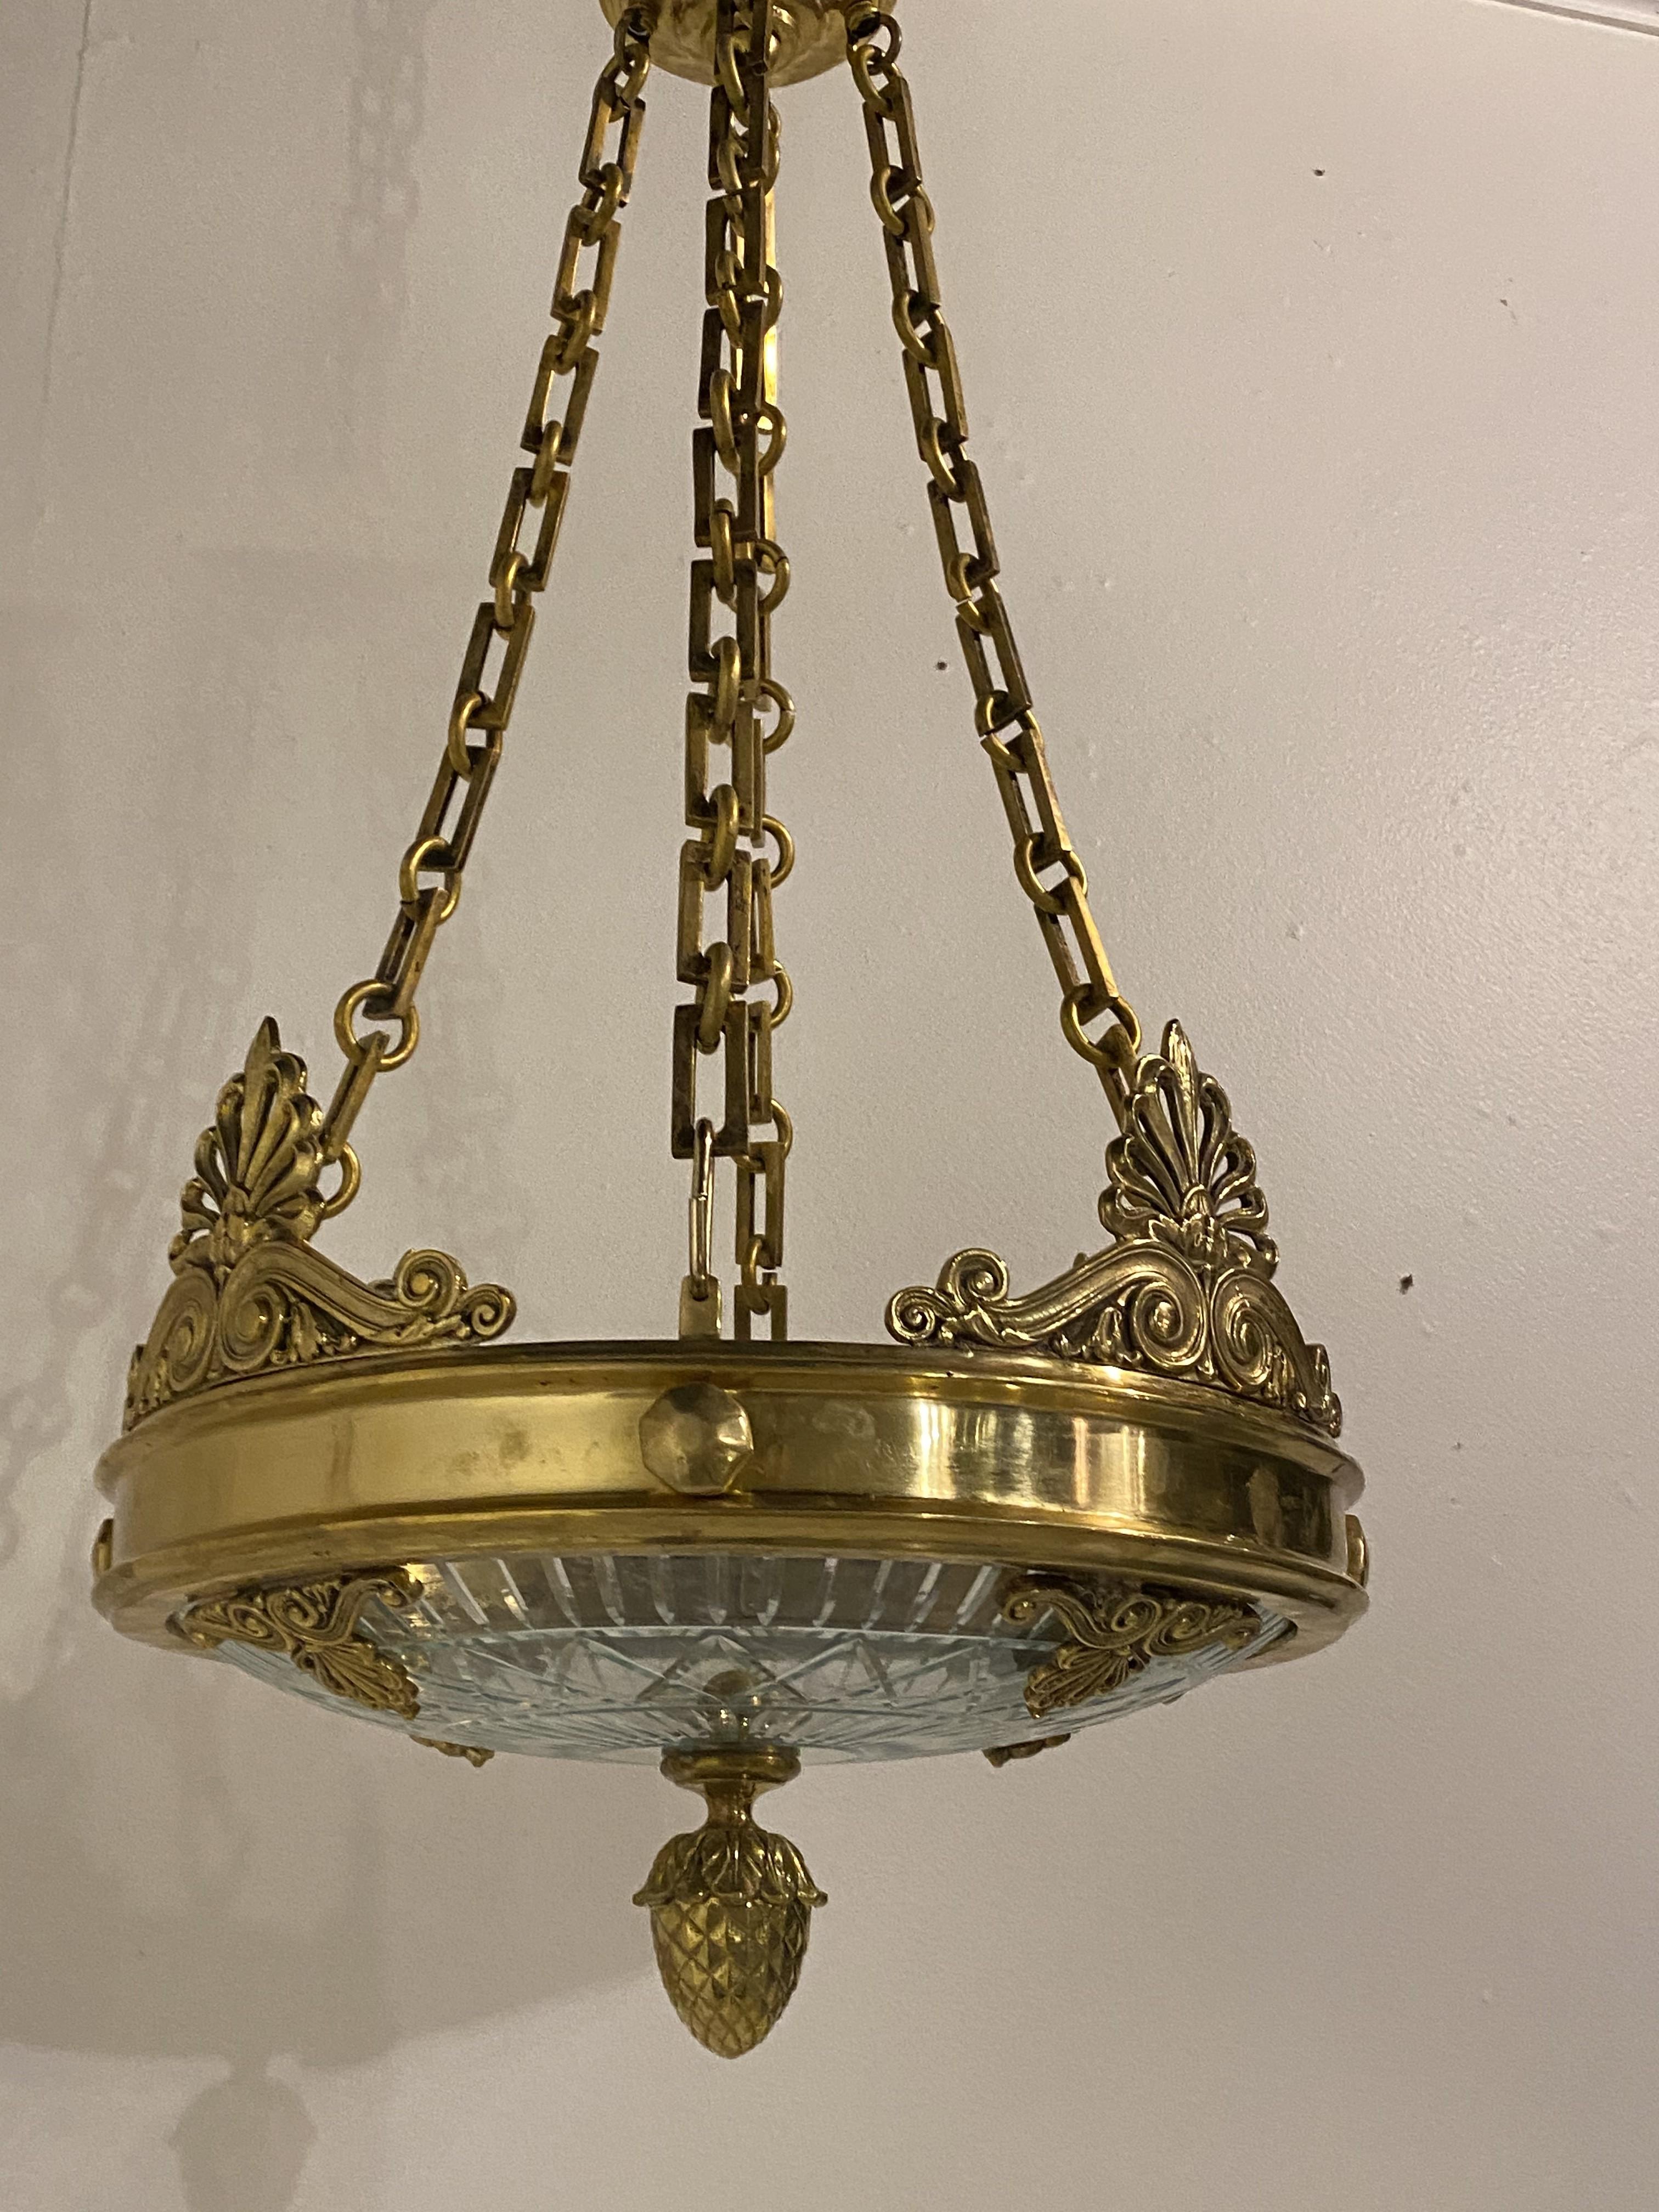 1920's Caldwell Gilt Bronze Neoclassical Chandelier with Cut Glass In Good Condition For Sale In New York, NY